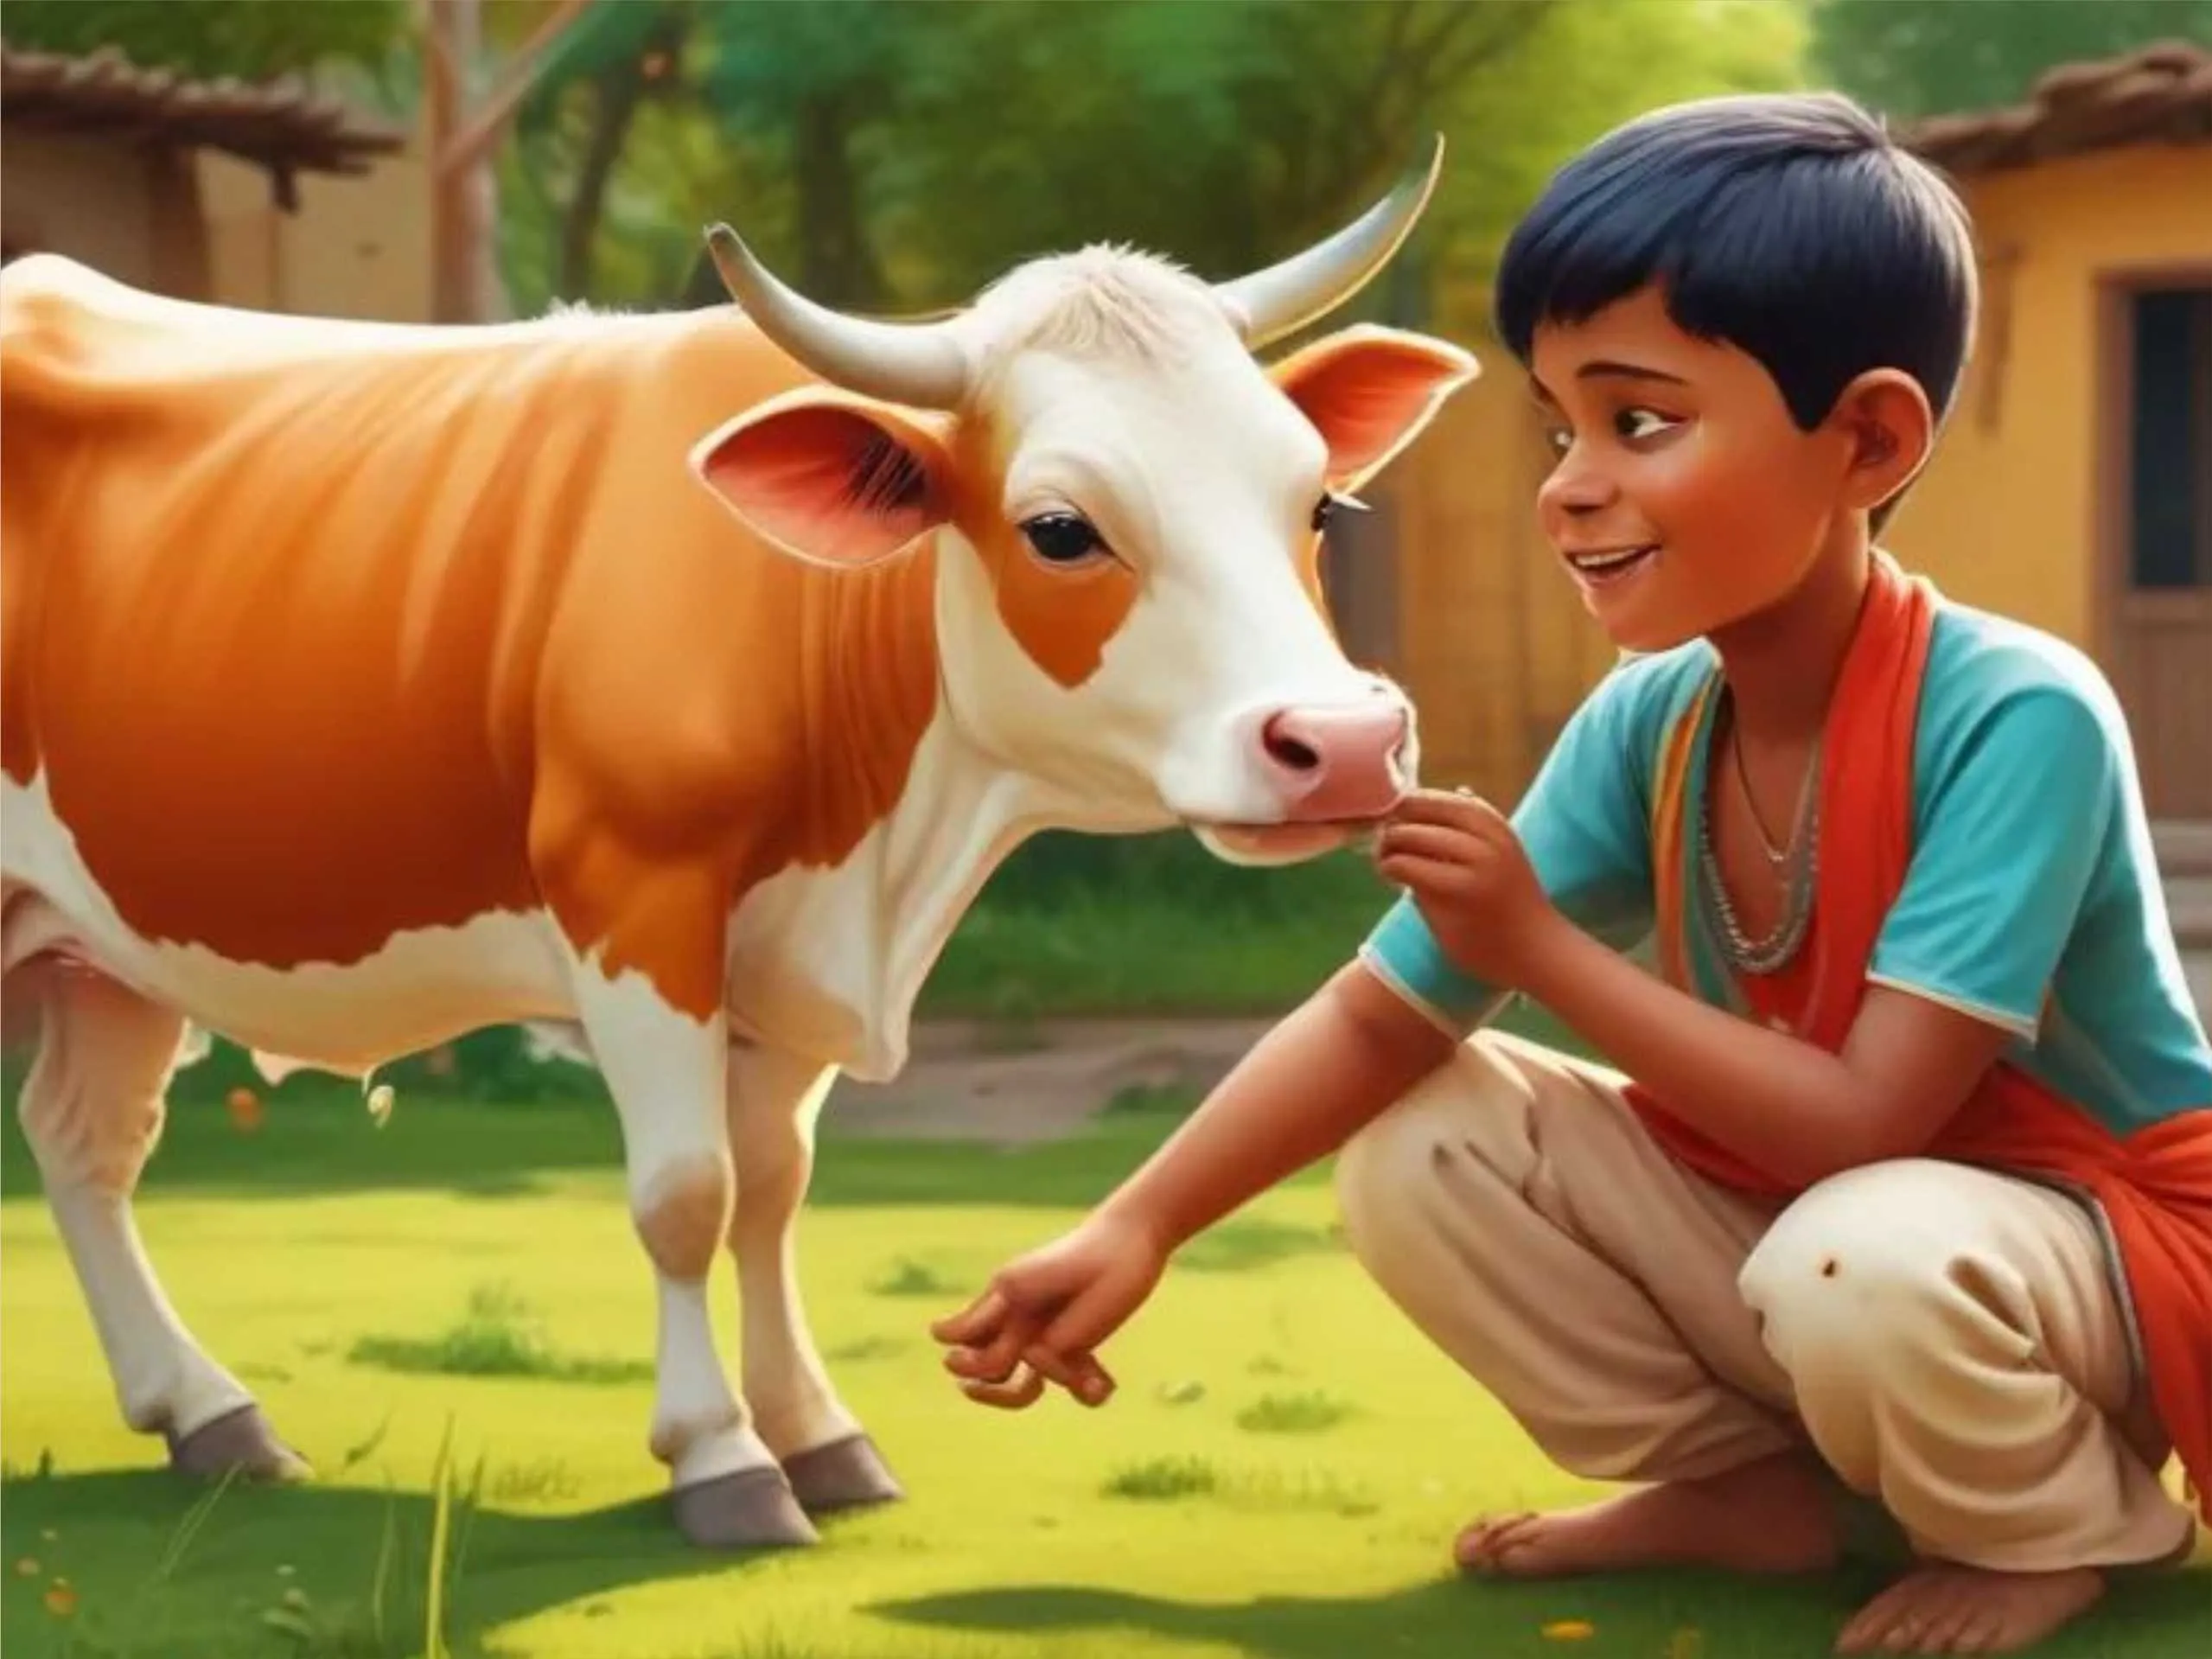 Cartoon image of and indian village boy playing with a cow